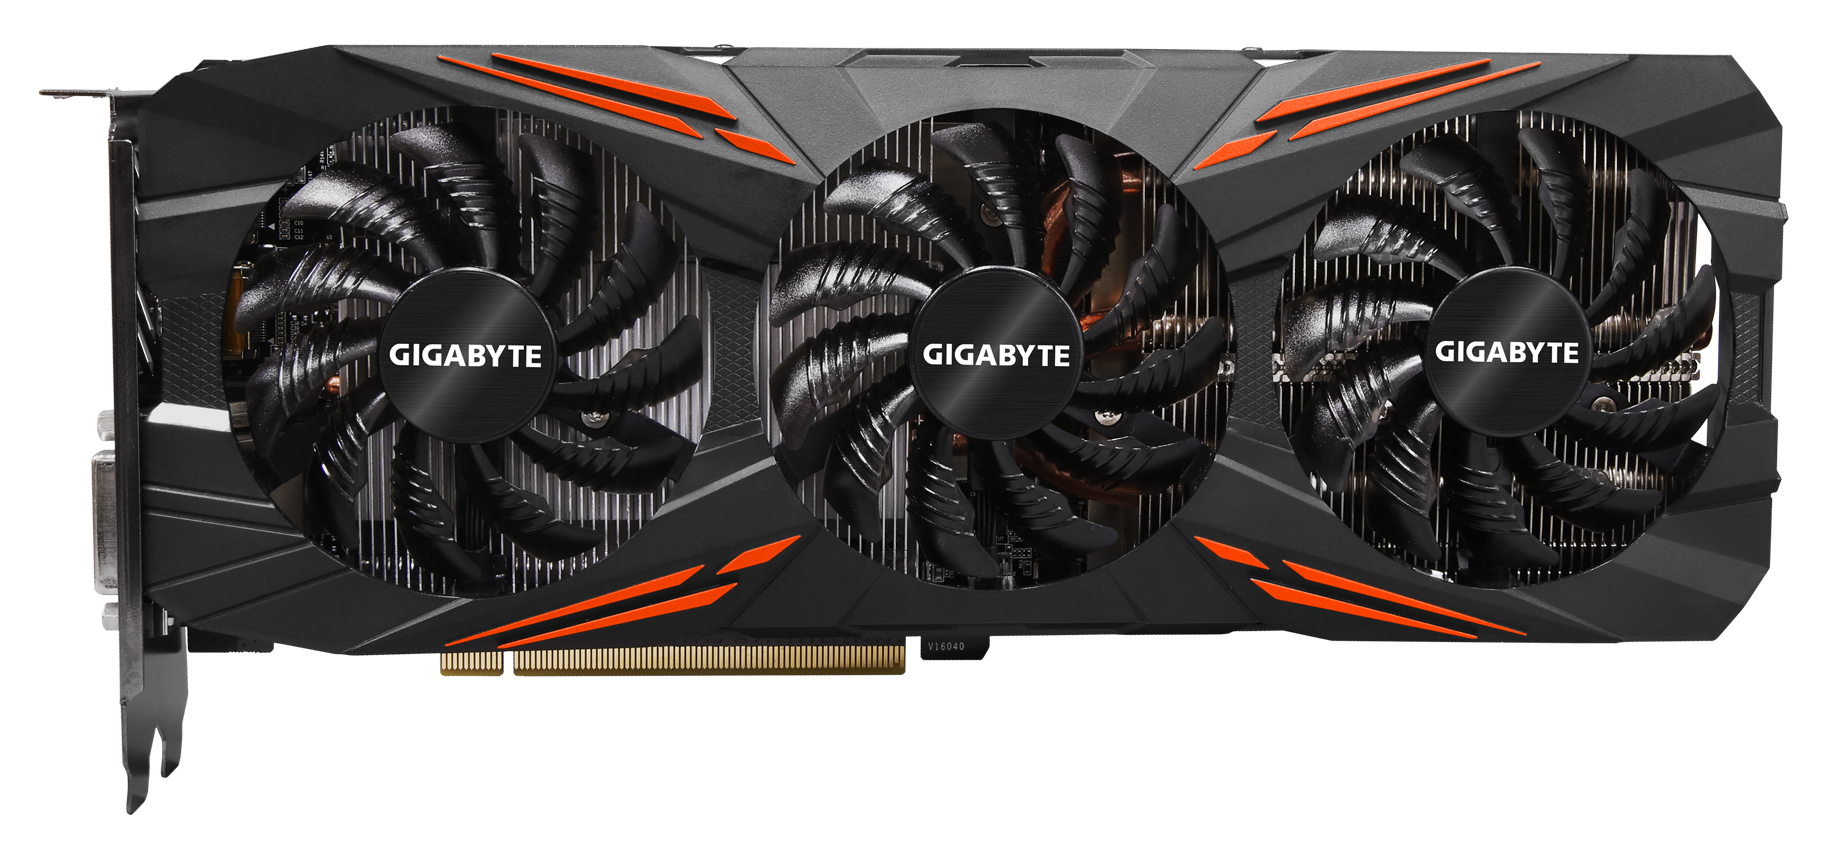 GIGABYTE Releases GeForce® GTX 1070 G1 GAMING Graphics Card | News ...